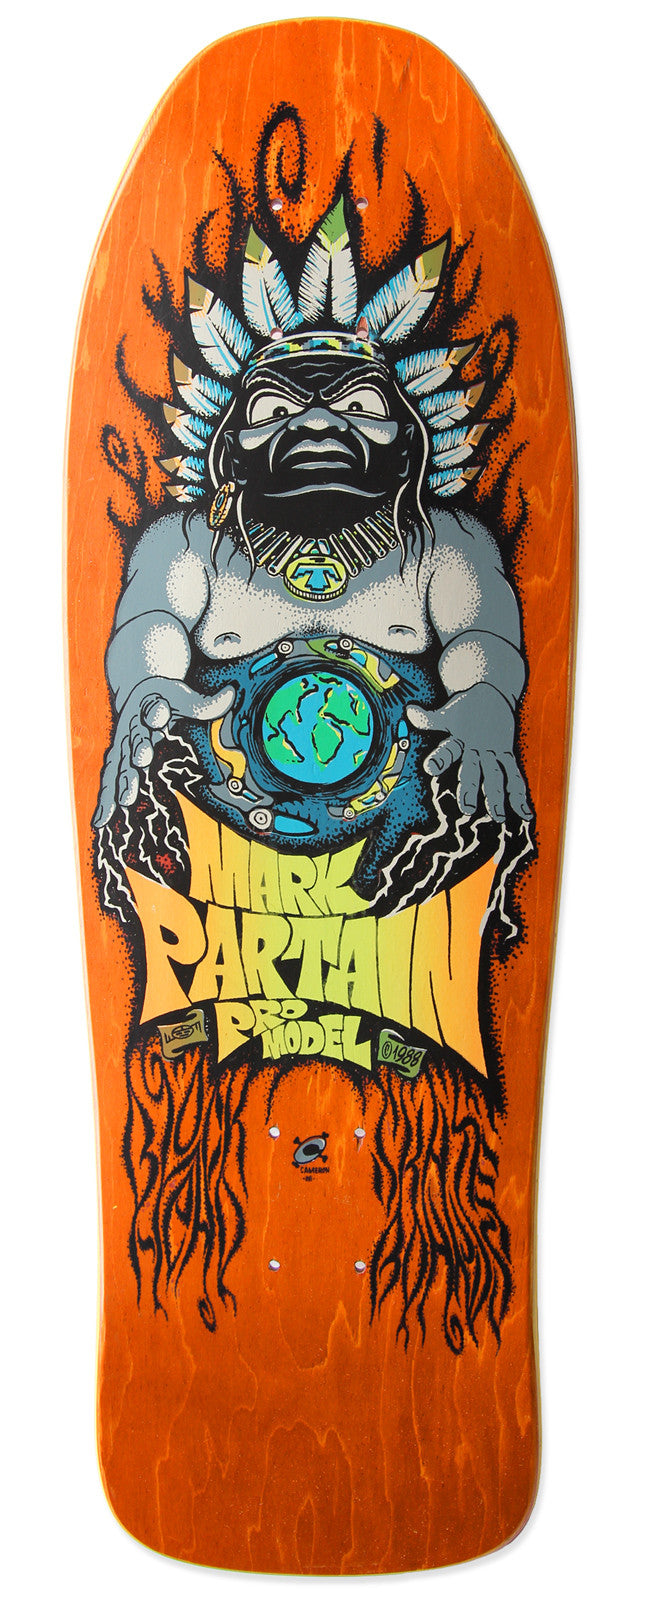 Mark Partain “Indian World” - sold out